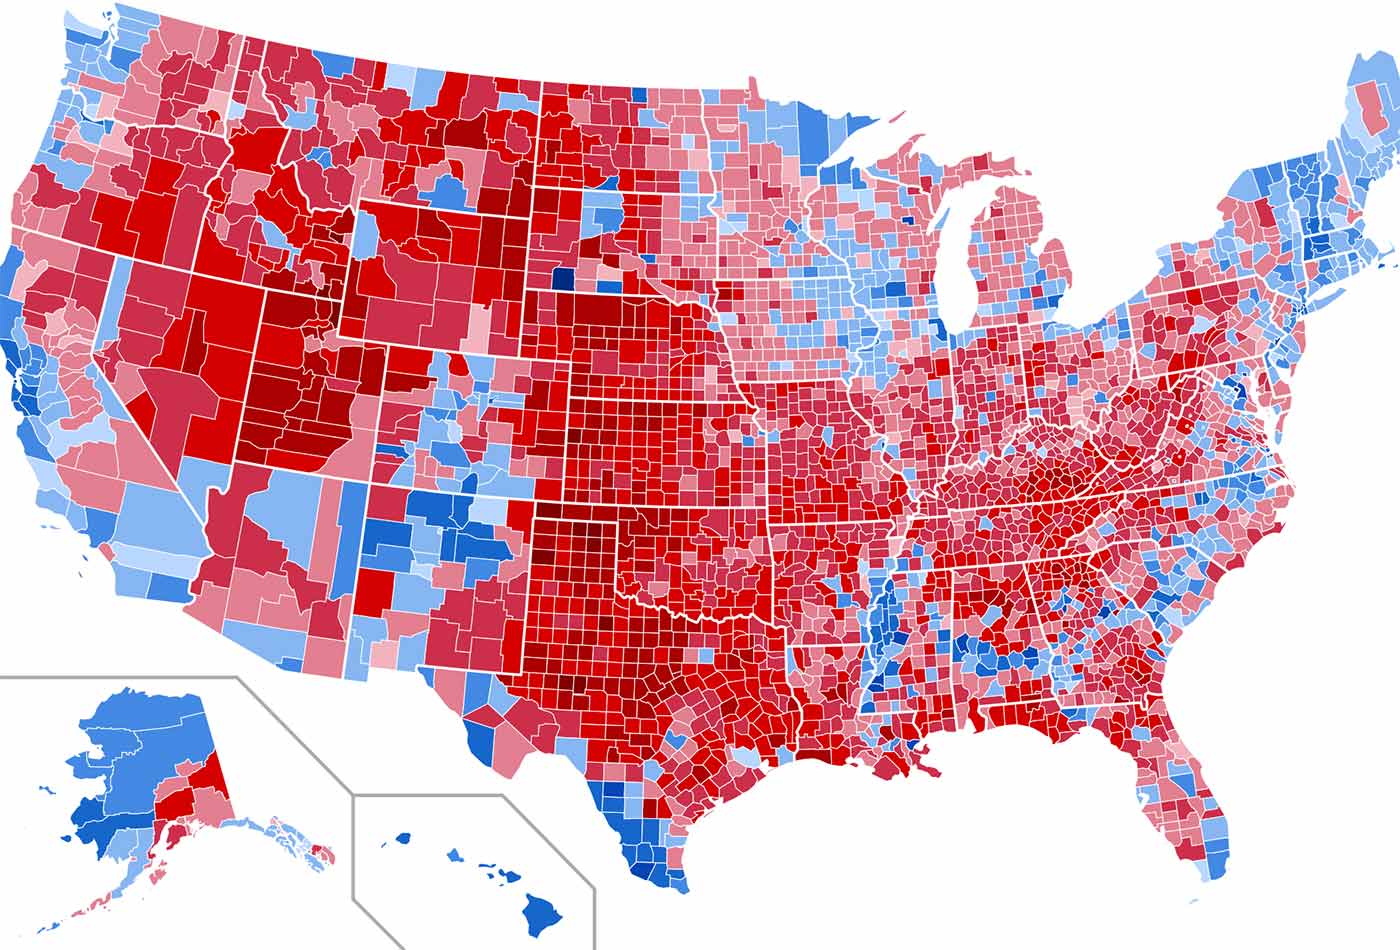 Results of the United States presidential election, 2012.